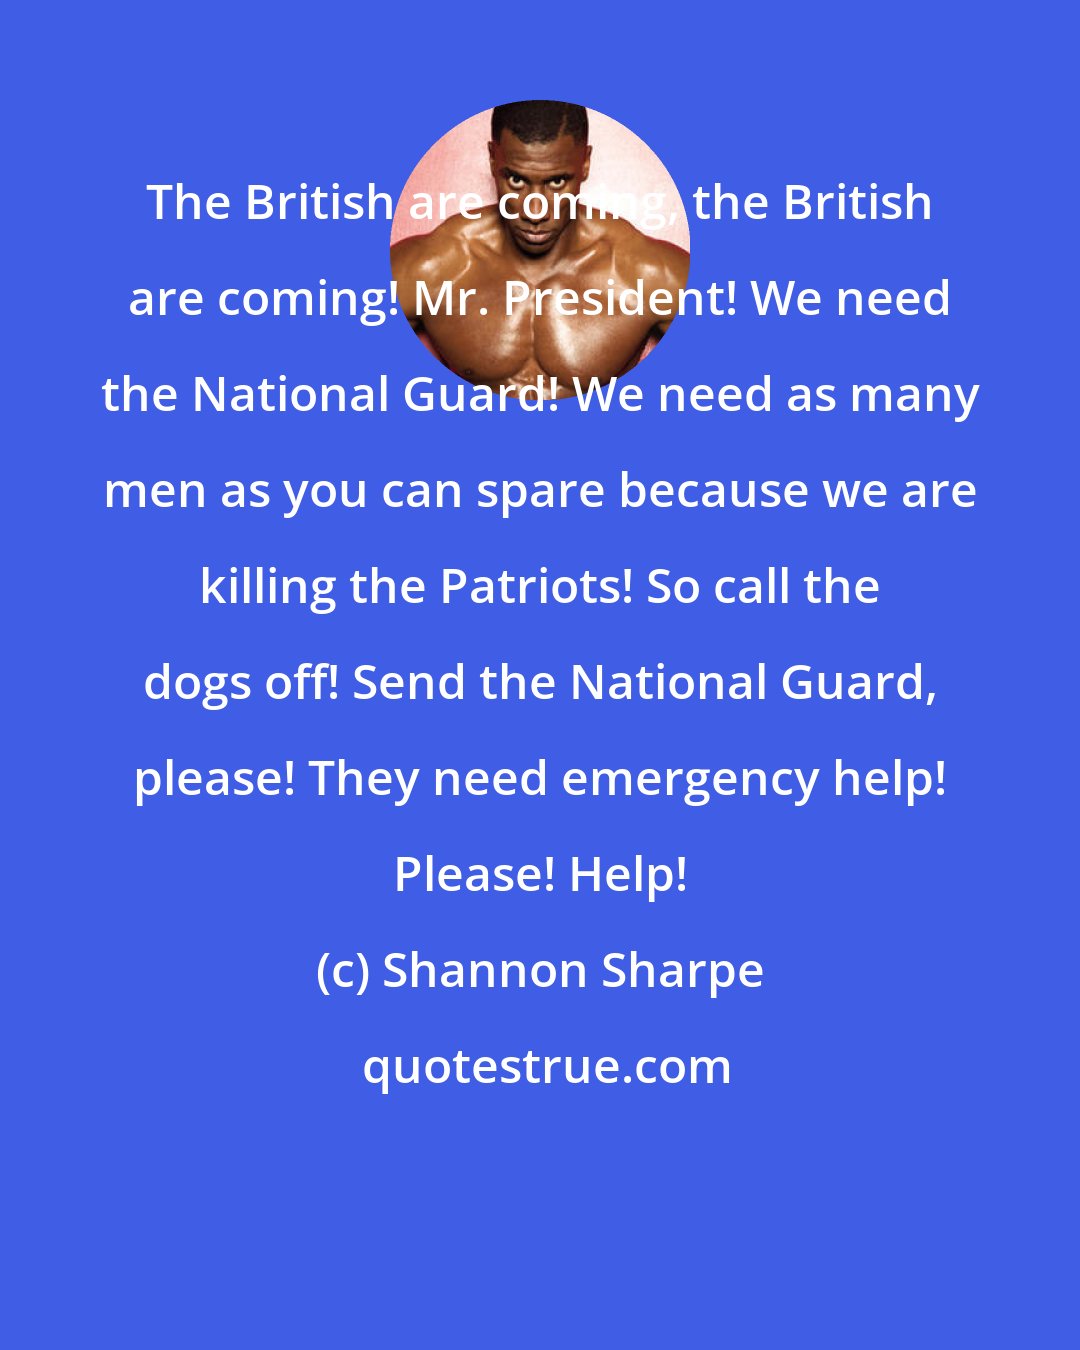 Shannon Sharpe: The British are coming, the British are coming! Mr. President! We need the National Guard! We need as many men as you can spare because we are killing the Patriots! So call the dogs off! Send the National Guard, please! They need emergency help! Please! Help!